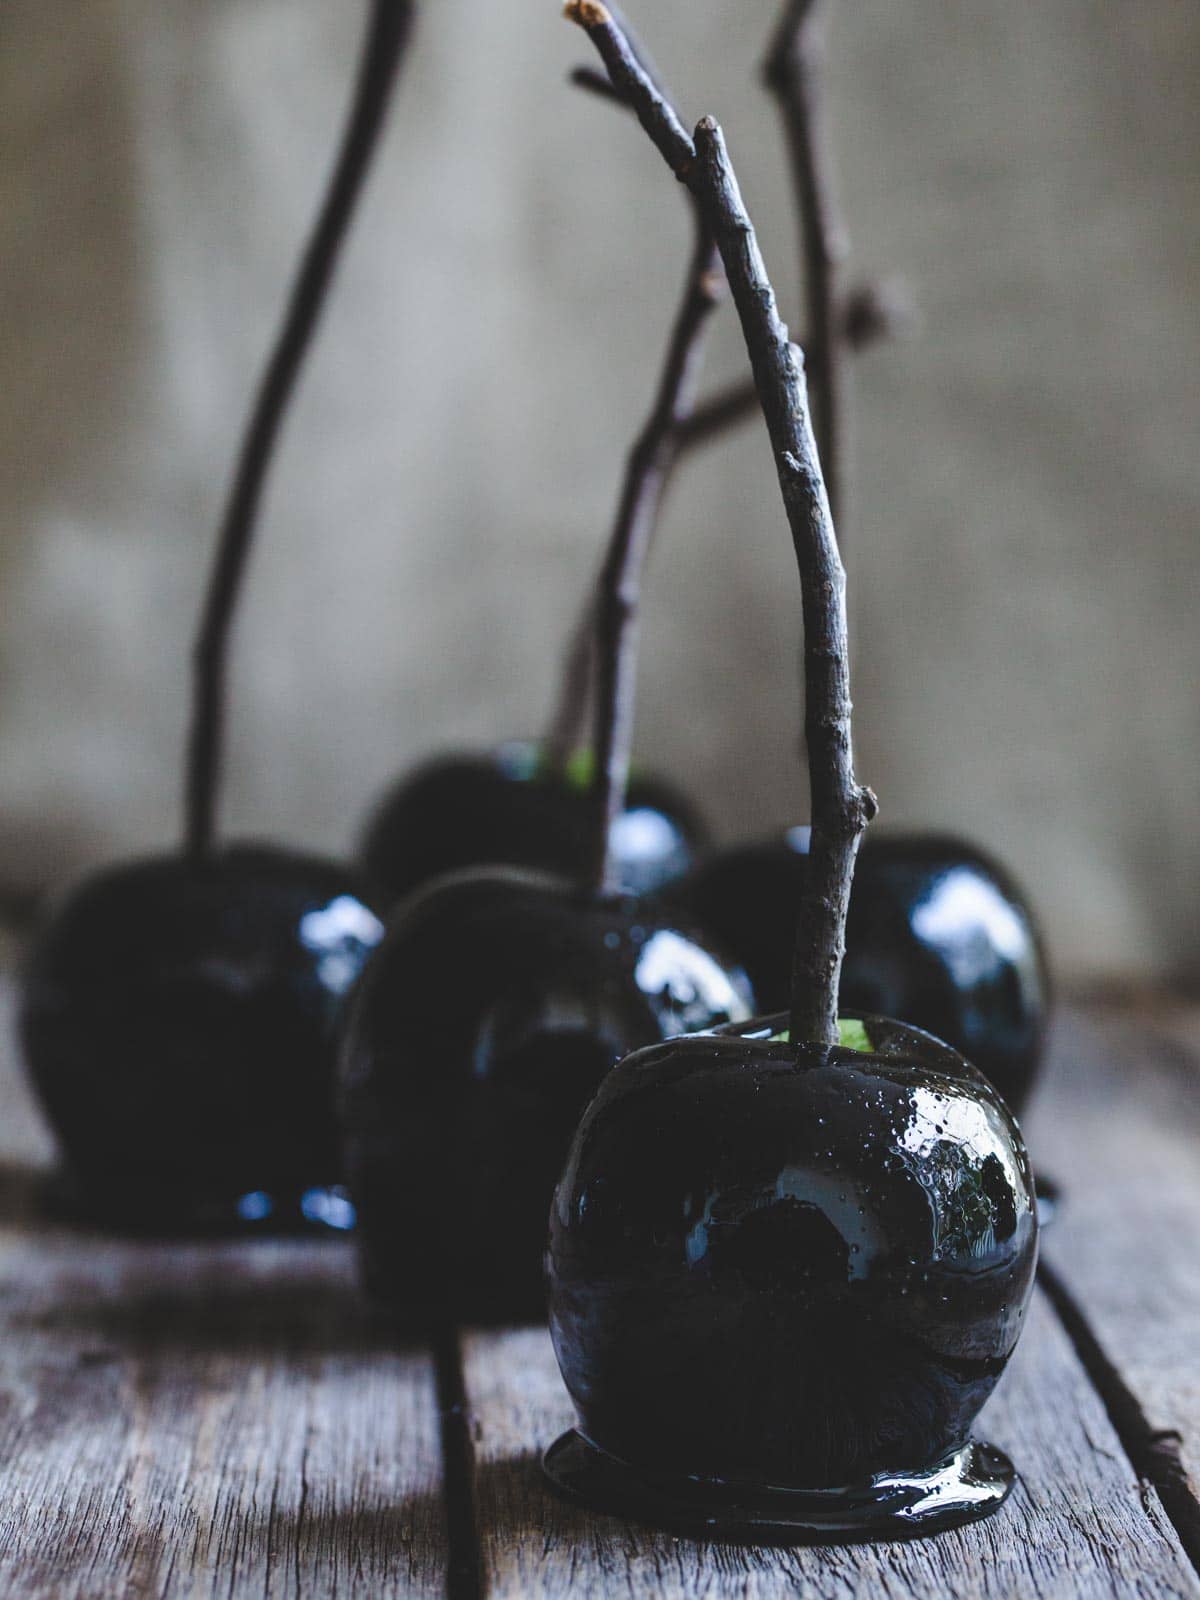 Shiny black toffee apples with sticks on a wooden table. 